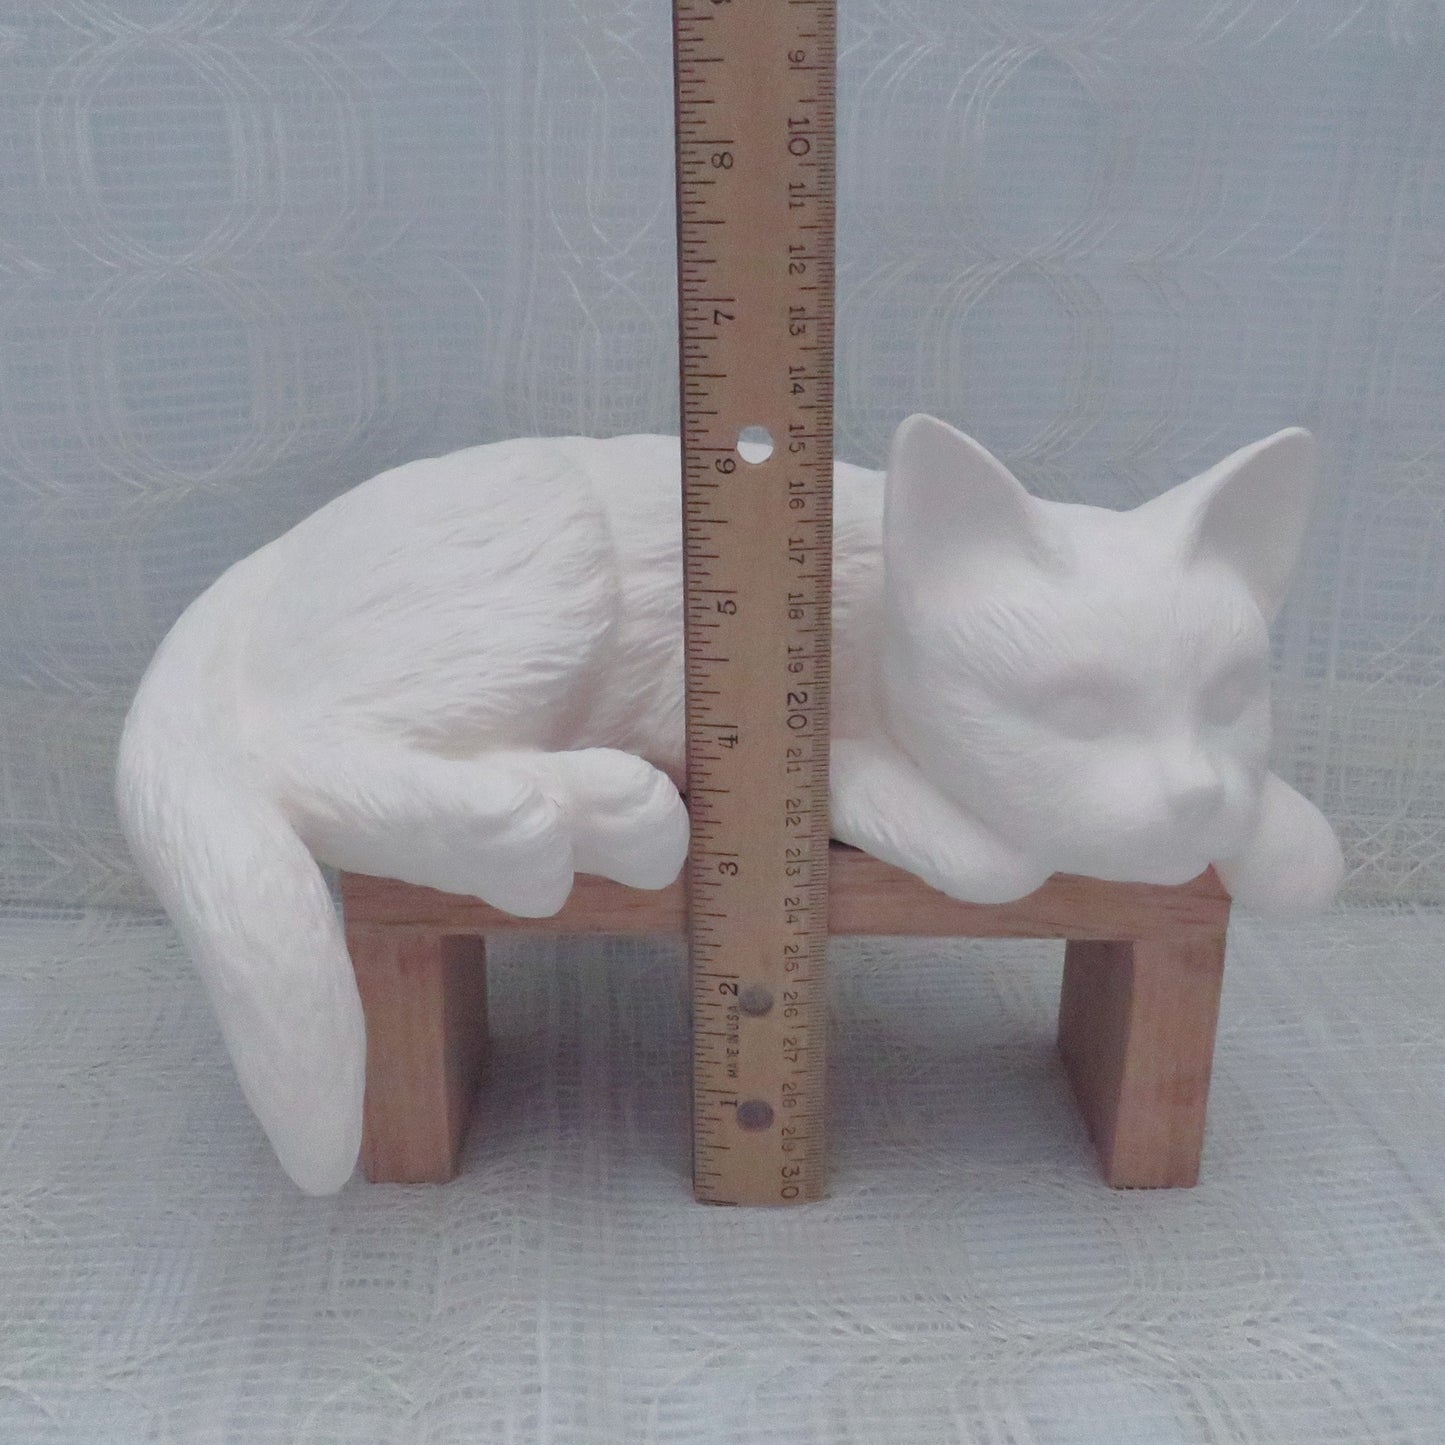 Large Unpainted Ceramic Cat Lying Down, Bisque Cat Figurine, Ready to Paint Resting Cat Statue, Ceramics to Paint, Paintable Ceramic Cat, Cat Lover Gift